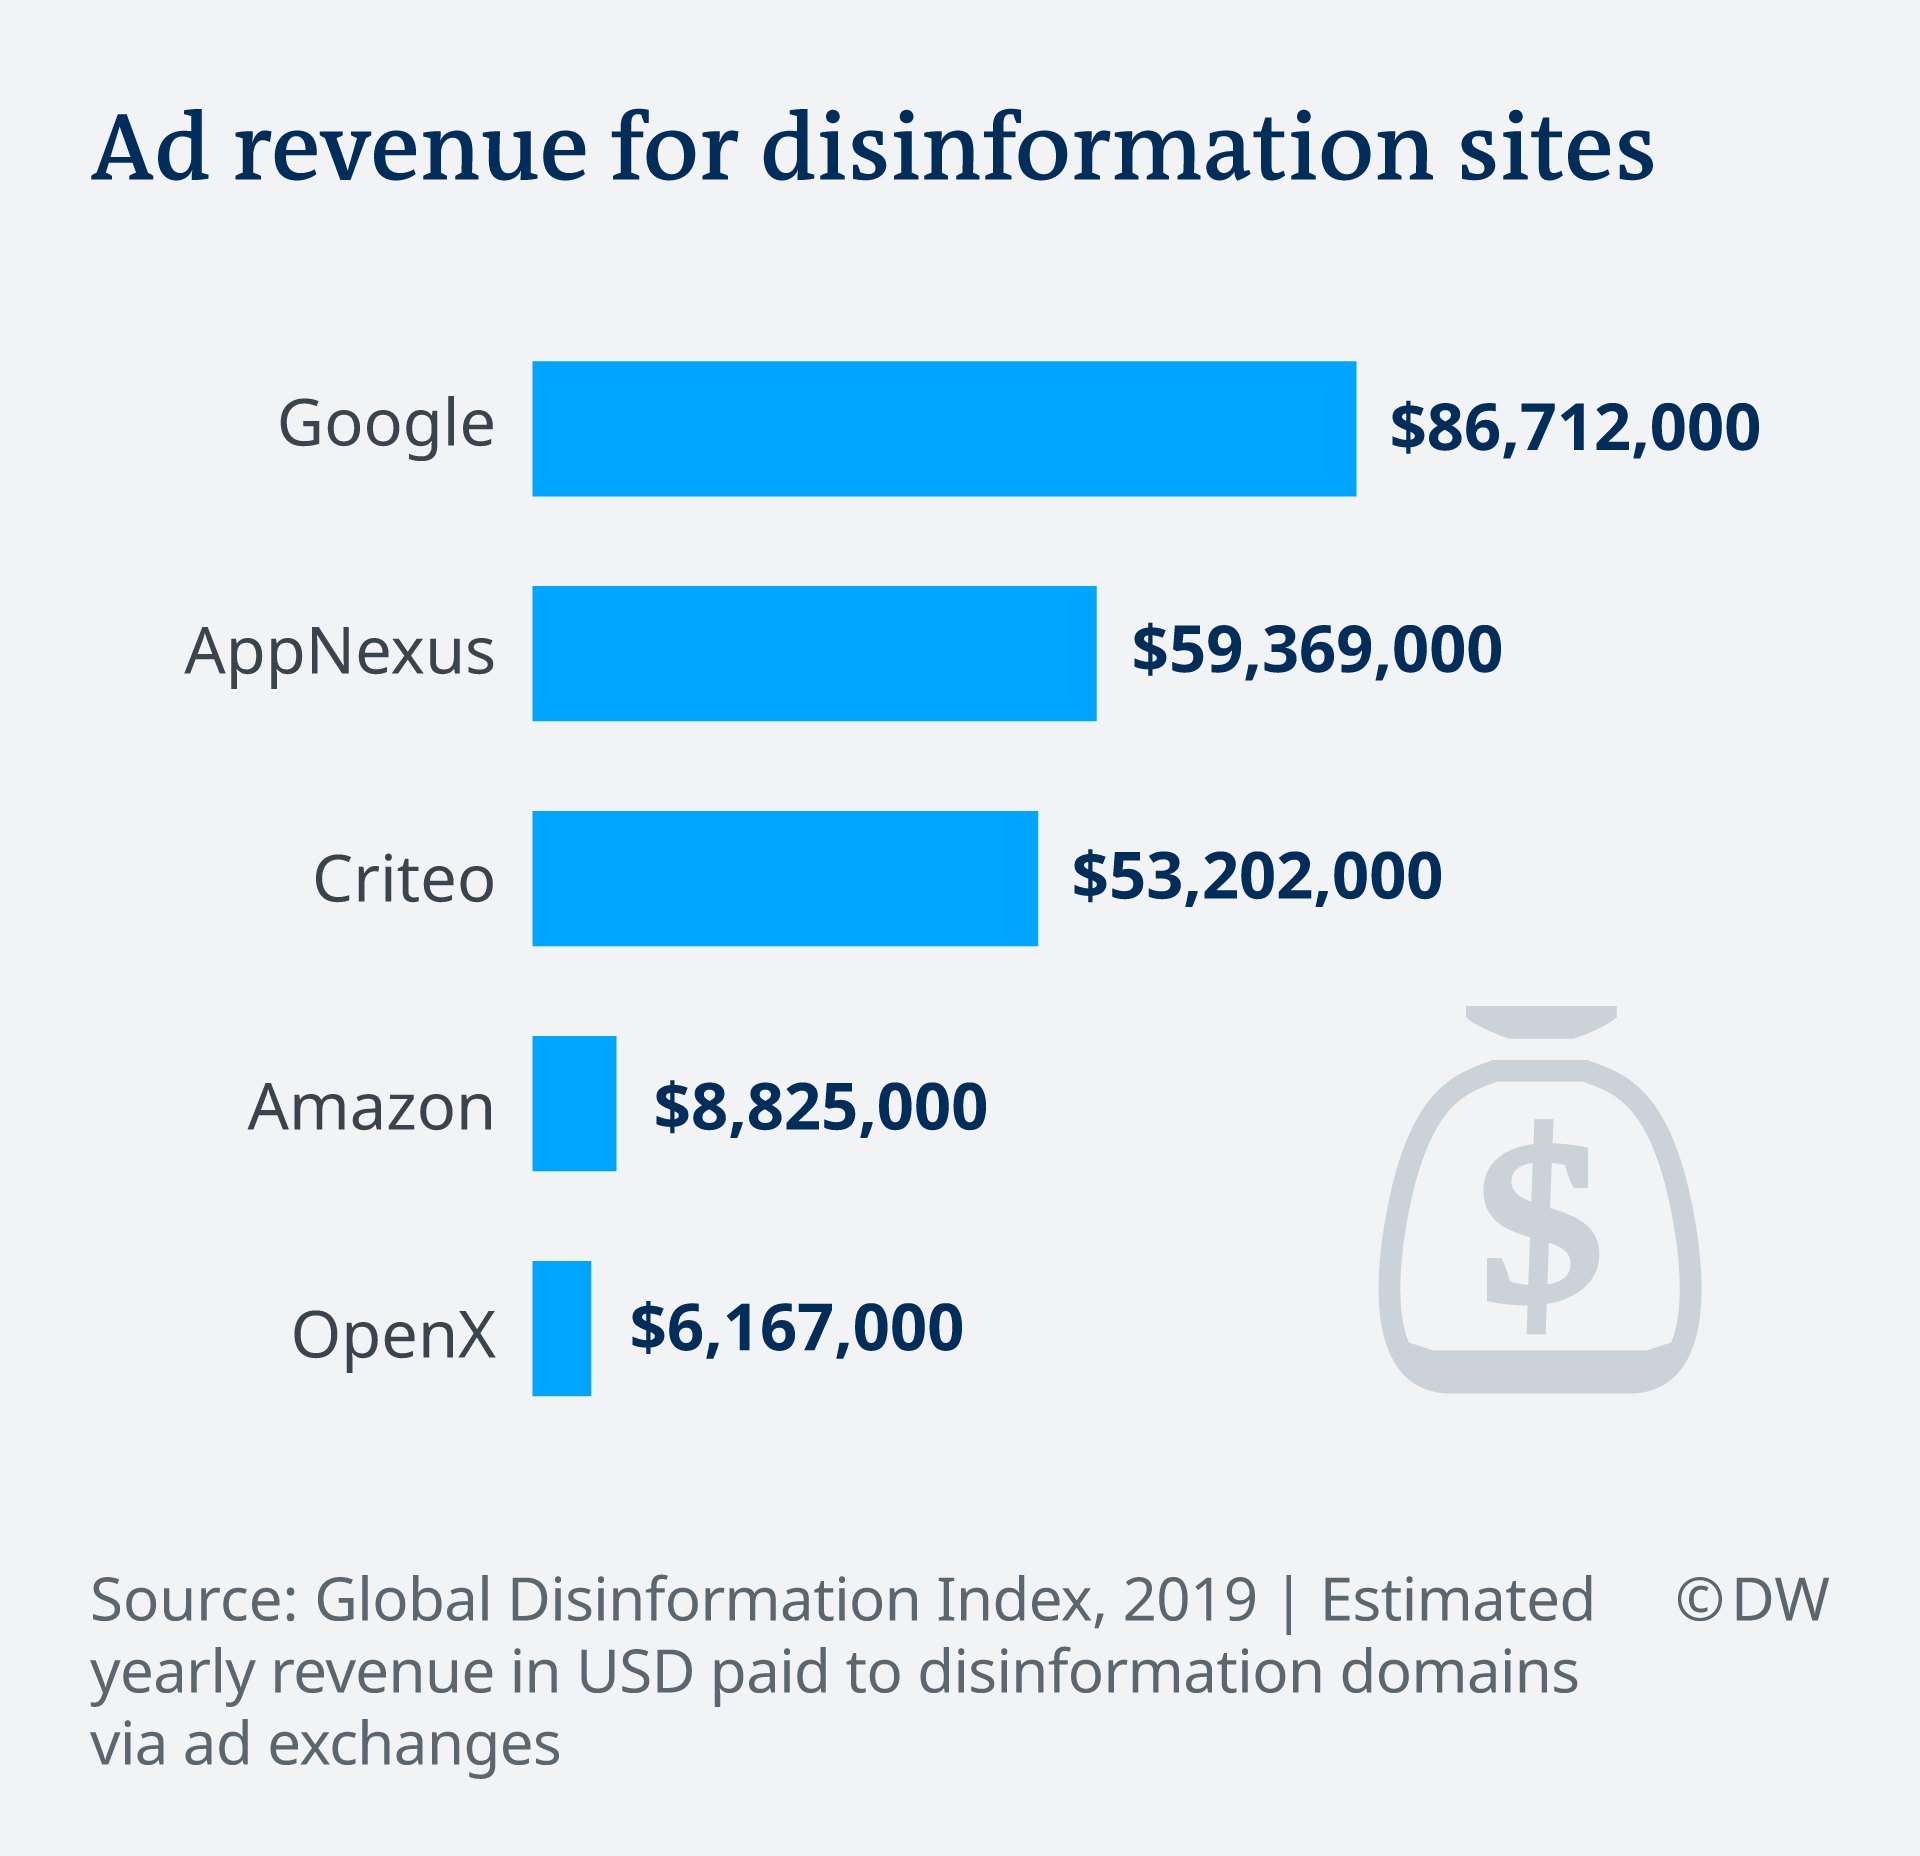 Infographic showing estimated yearly revenue in USD paid to disinformation domains via ad exchanges